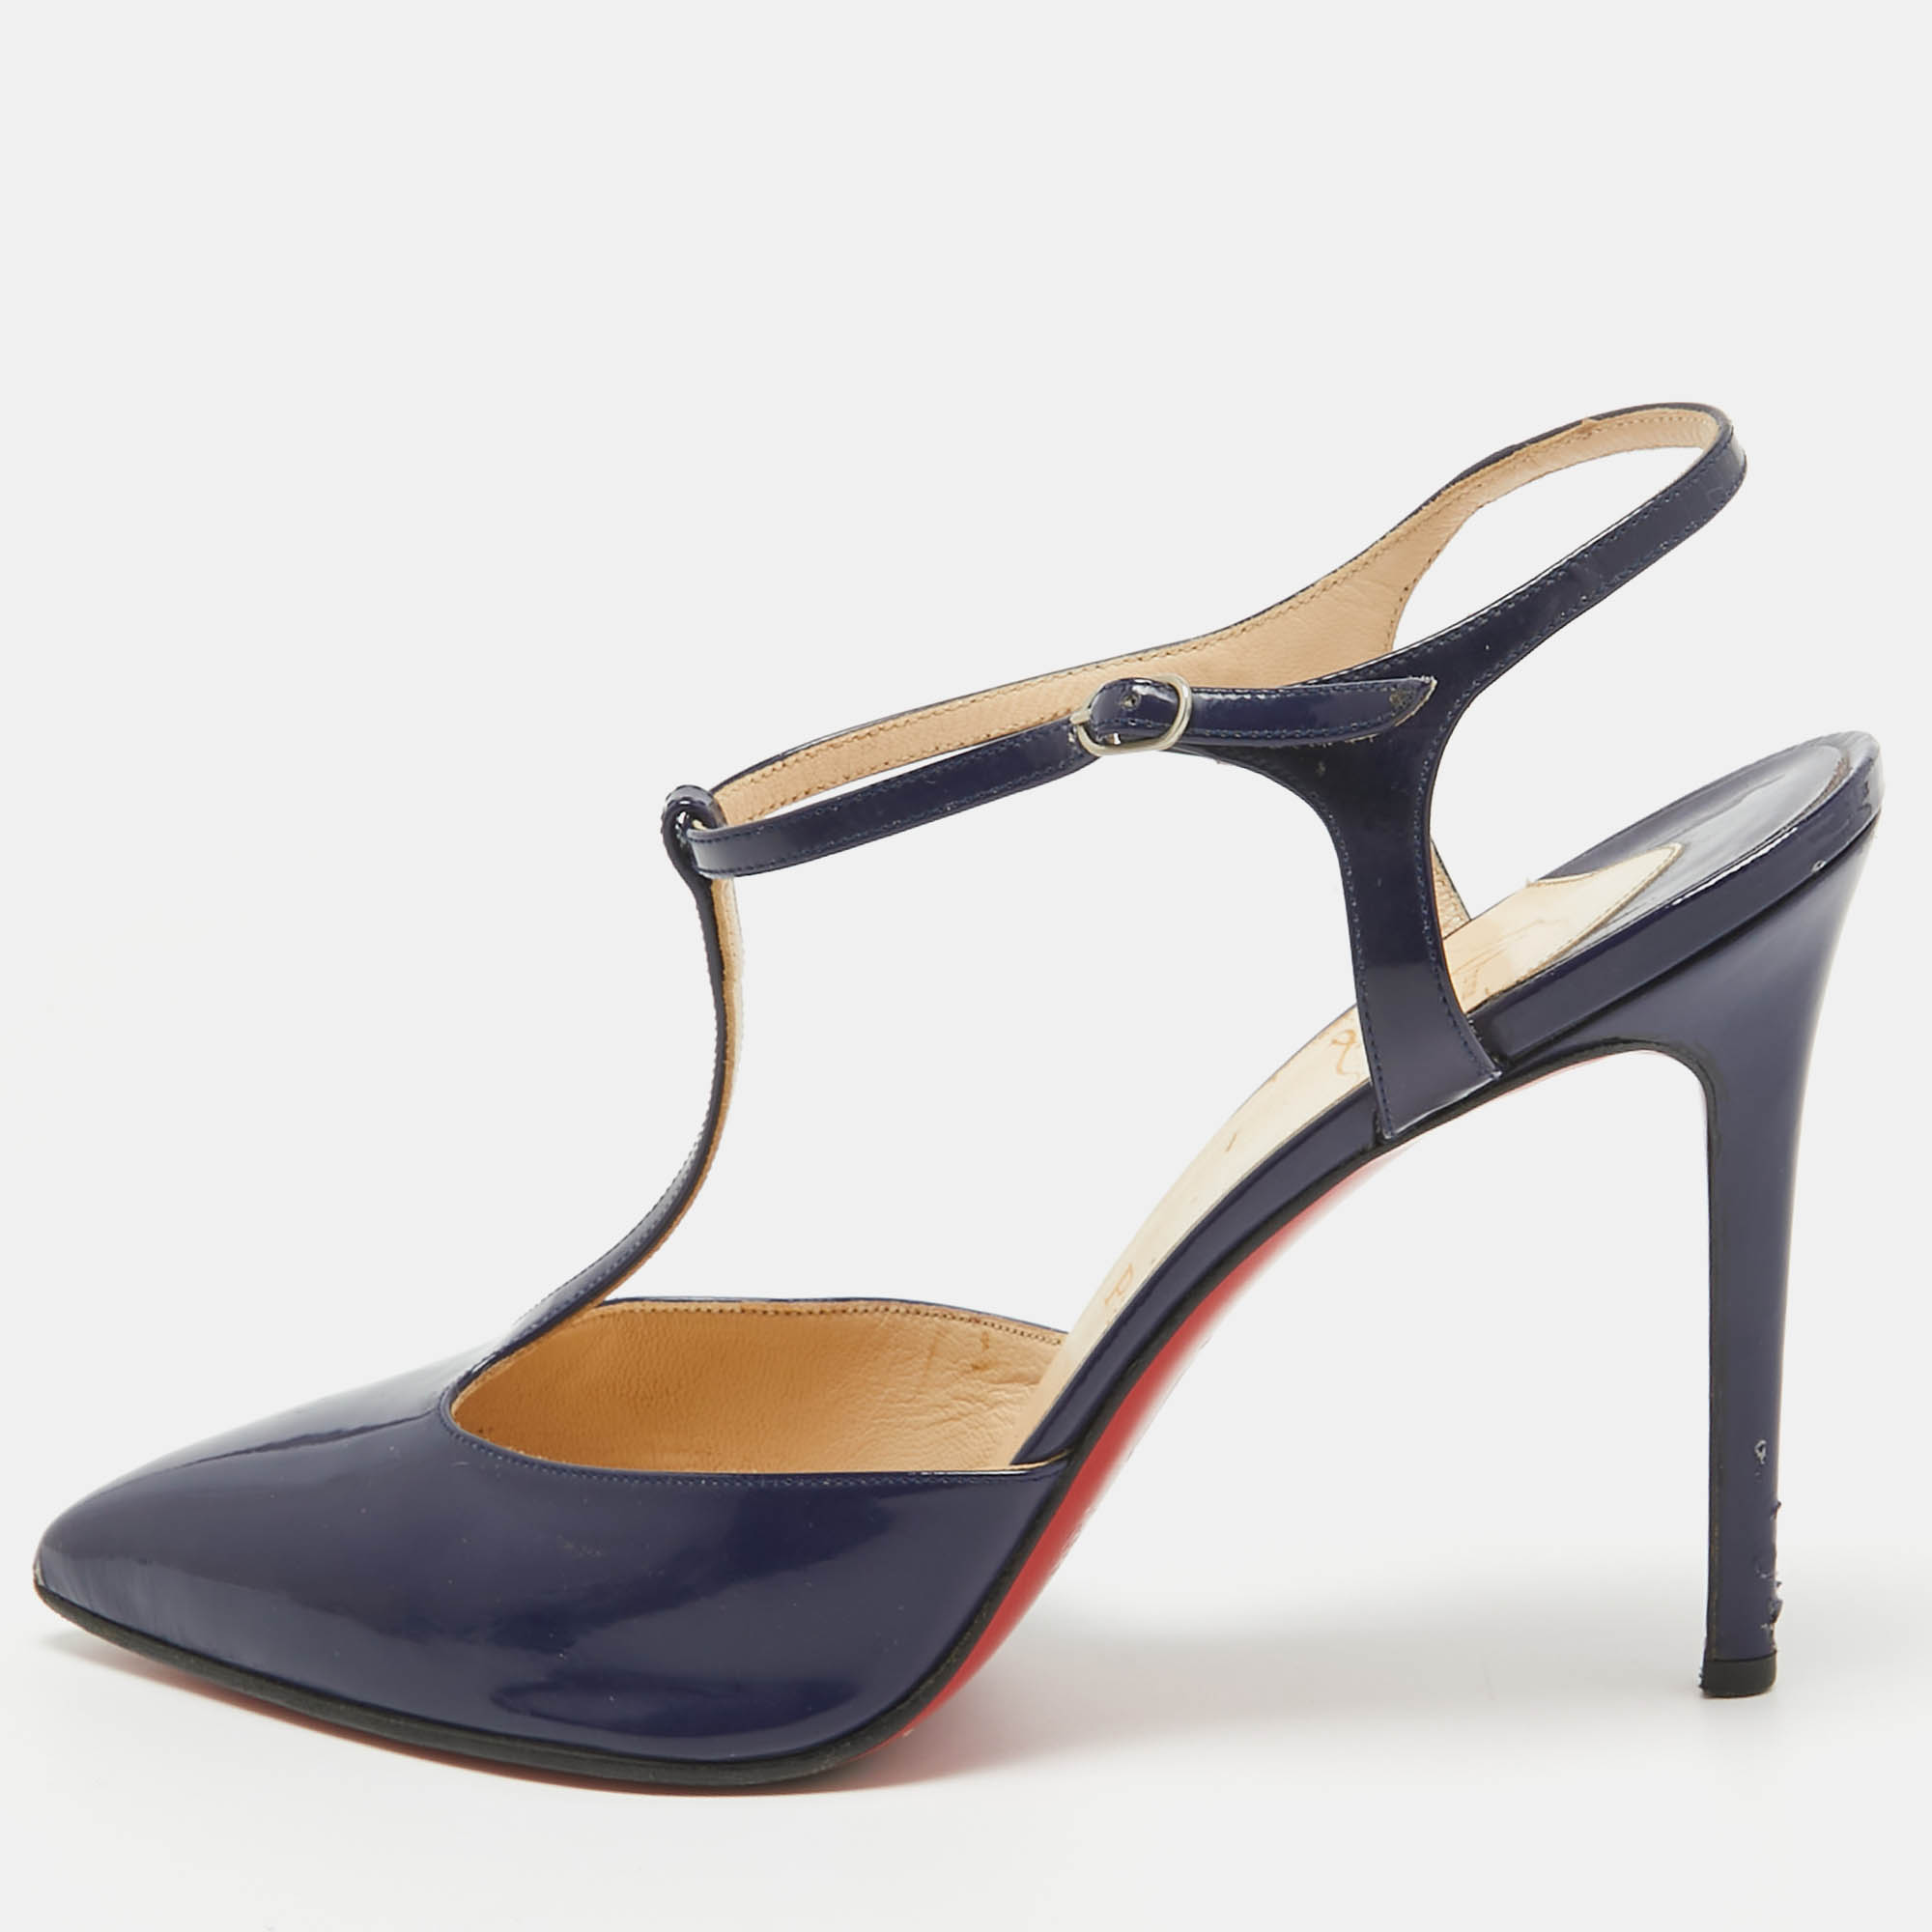 Wonderfully crafted shoes added with notable elements to fit well and pair perfectly with all your plans. Make these Christian Louboutin blue pumps yours today